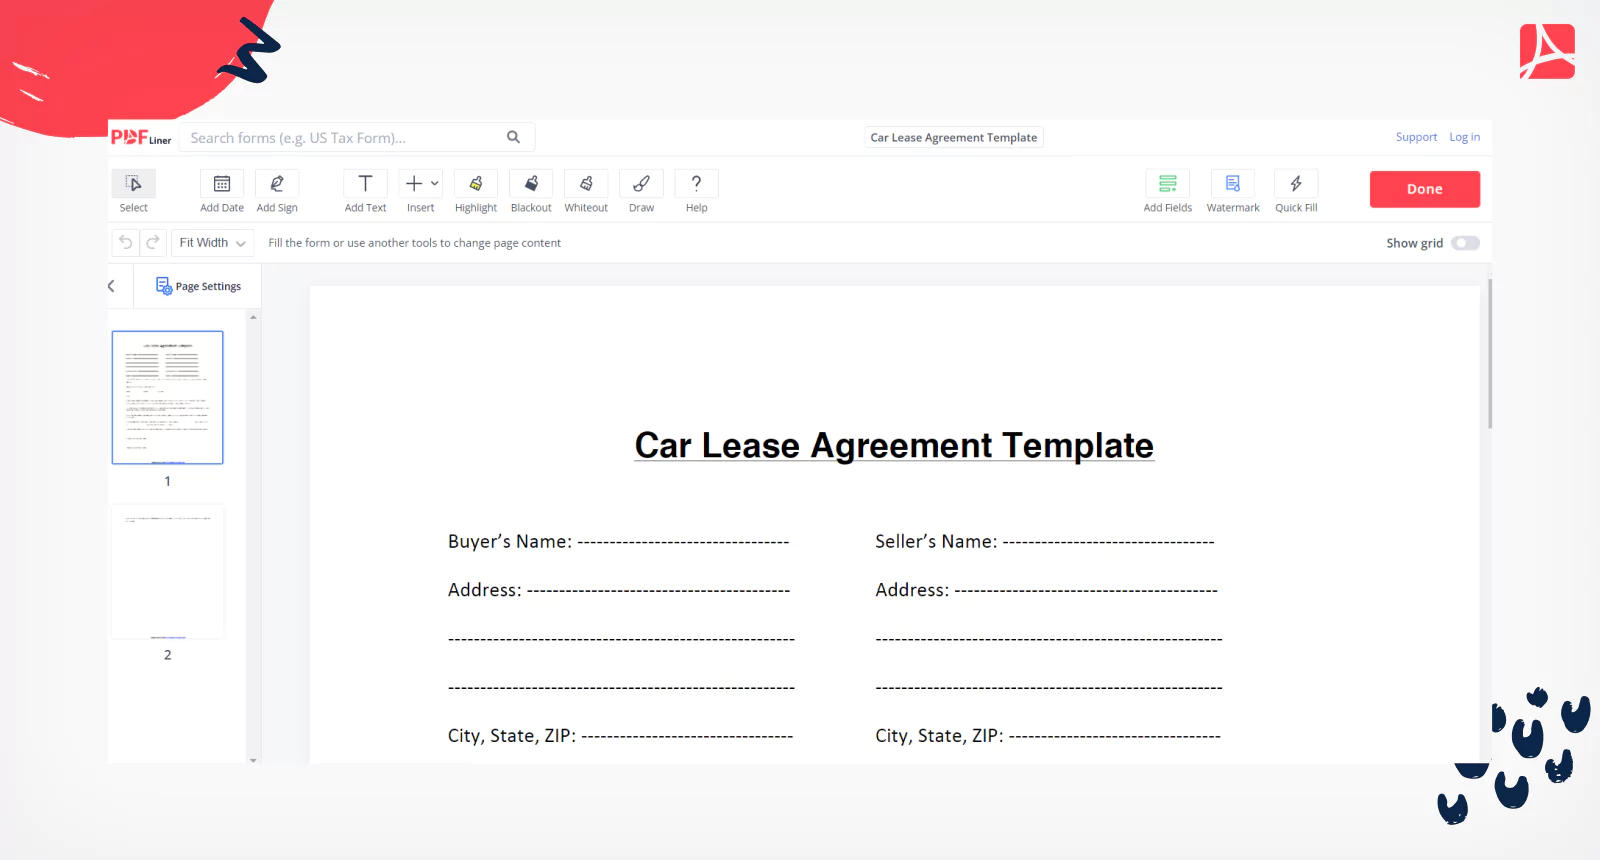 Car Lease Agreement Template on PDFLiner